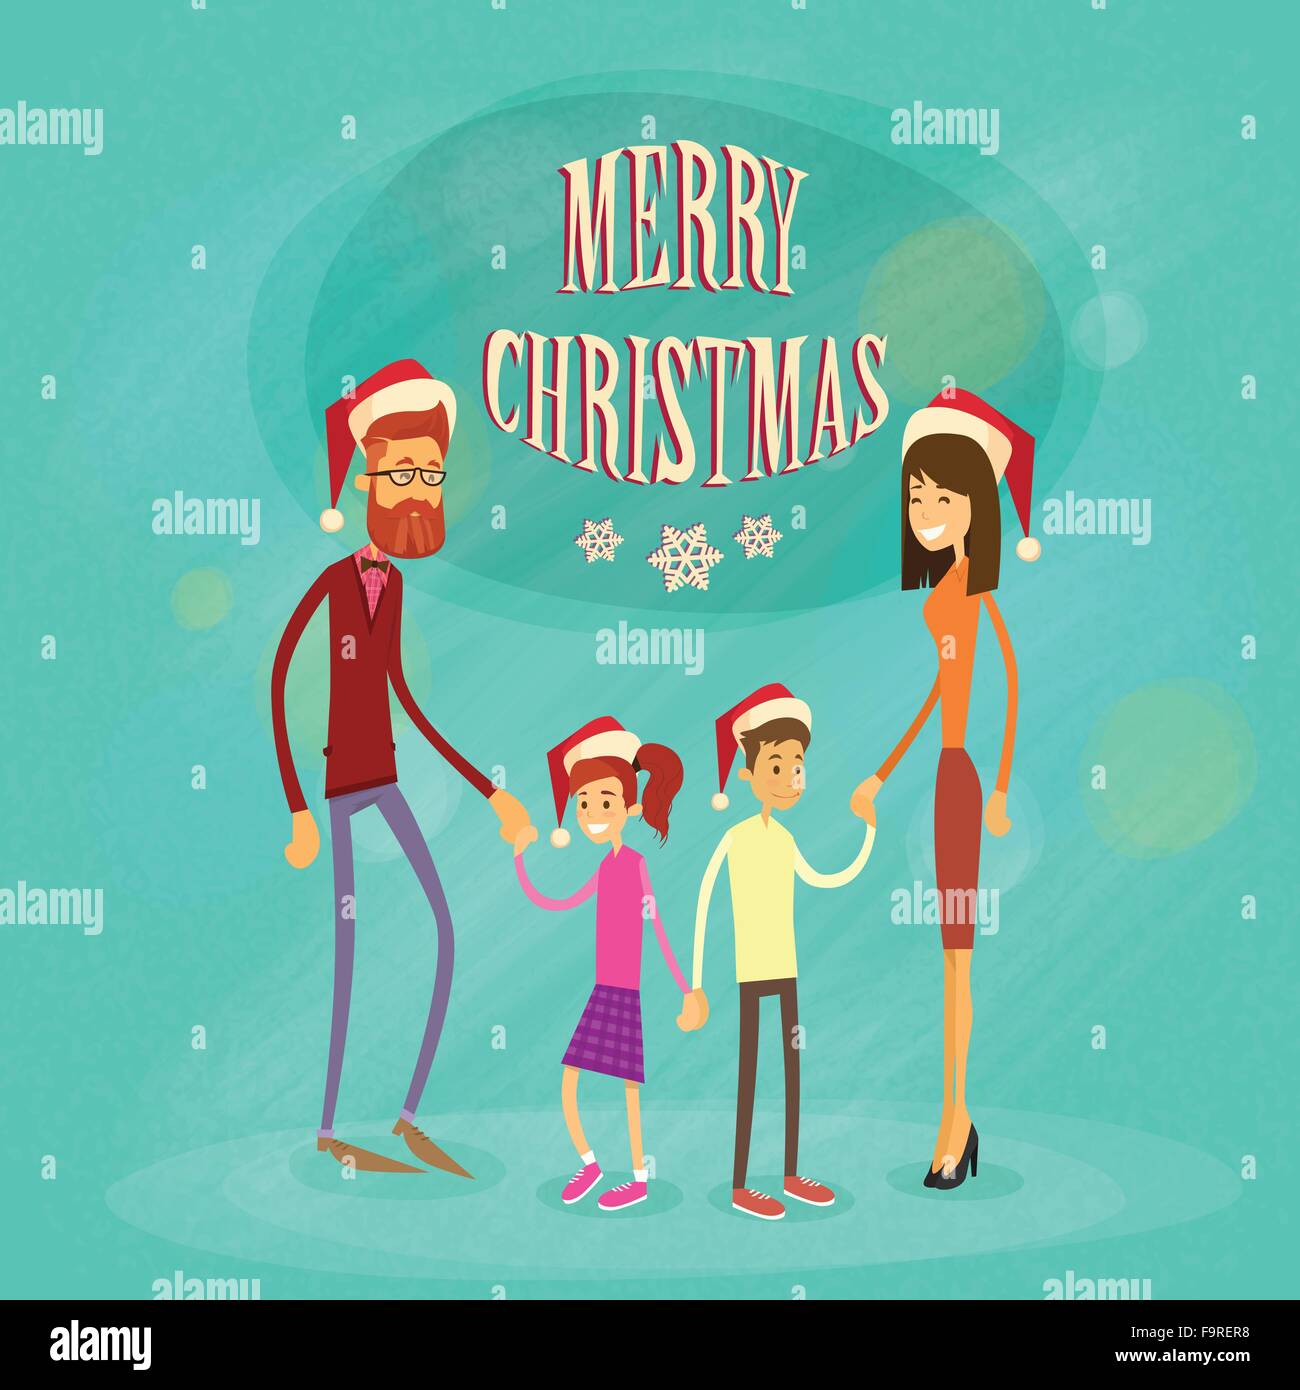 Family Merry Christmas Holiday Happy New Year Parents With Children Stock Image